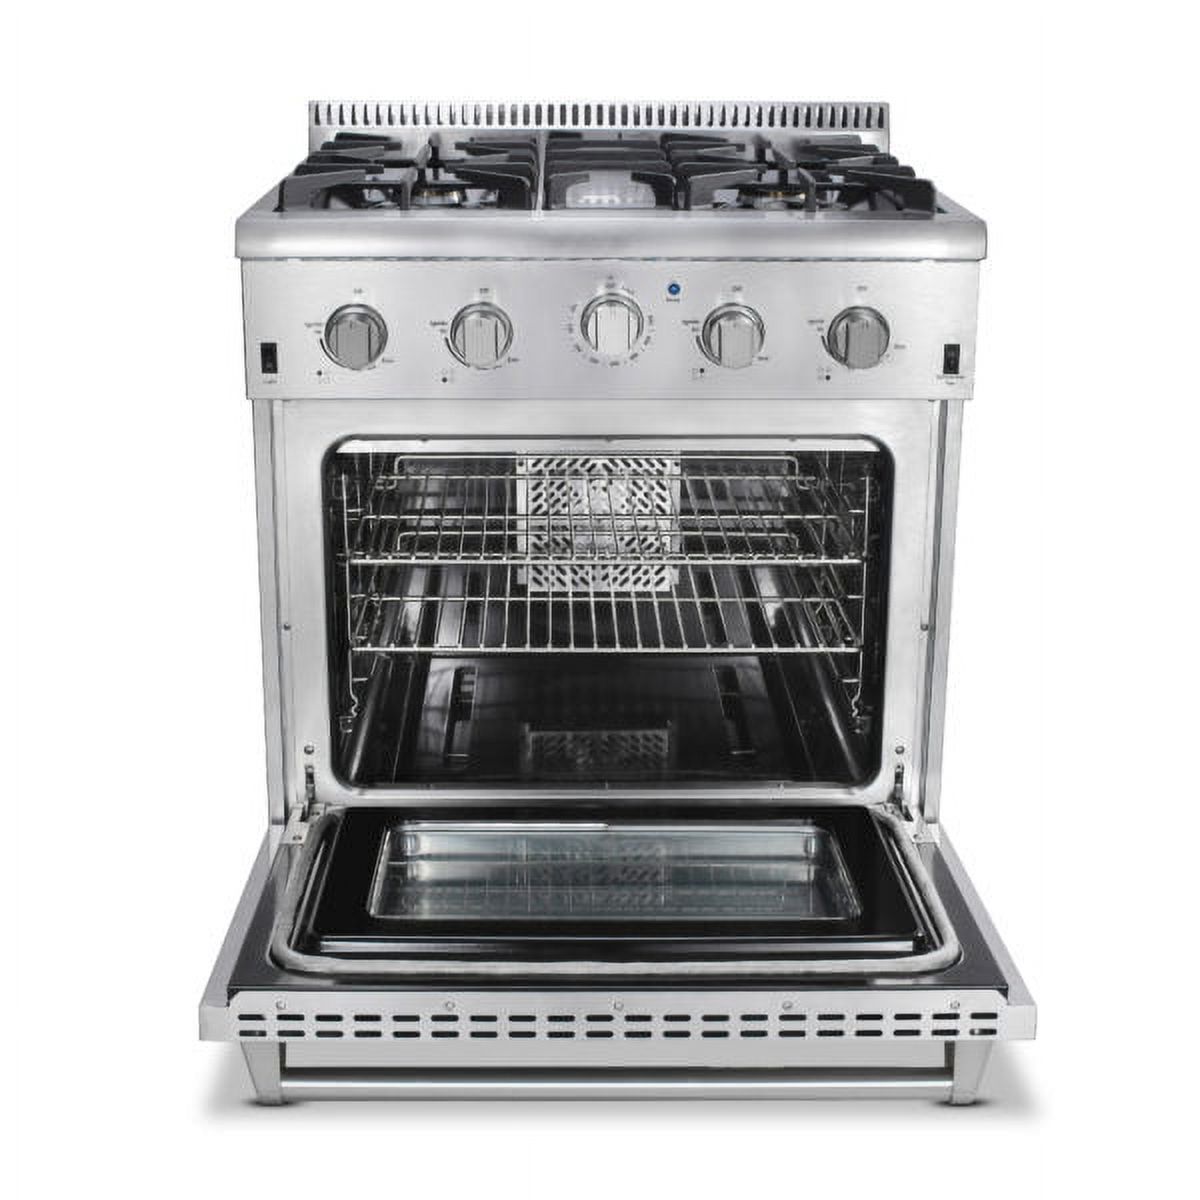 Thor Kitchen 30" Professional Free Standing Dual Fuel Range, Stainless Steel - image 4 of 6